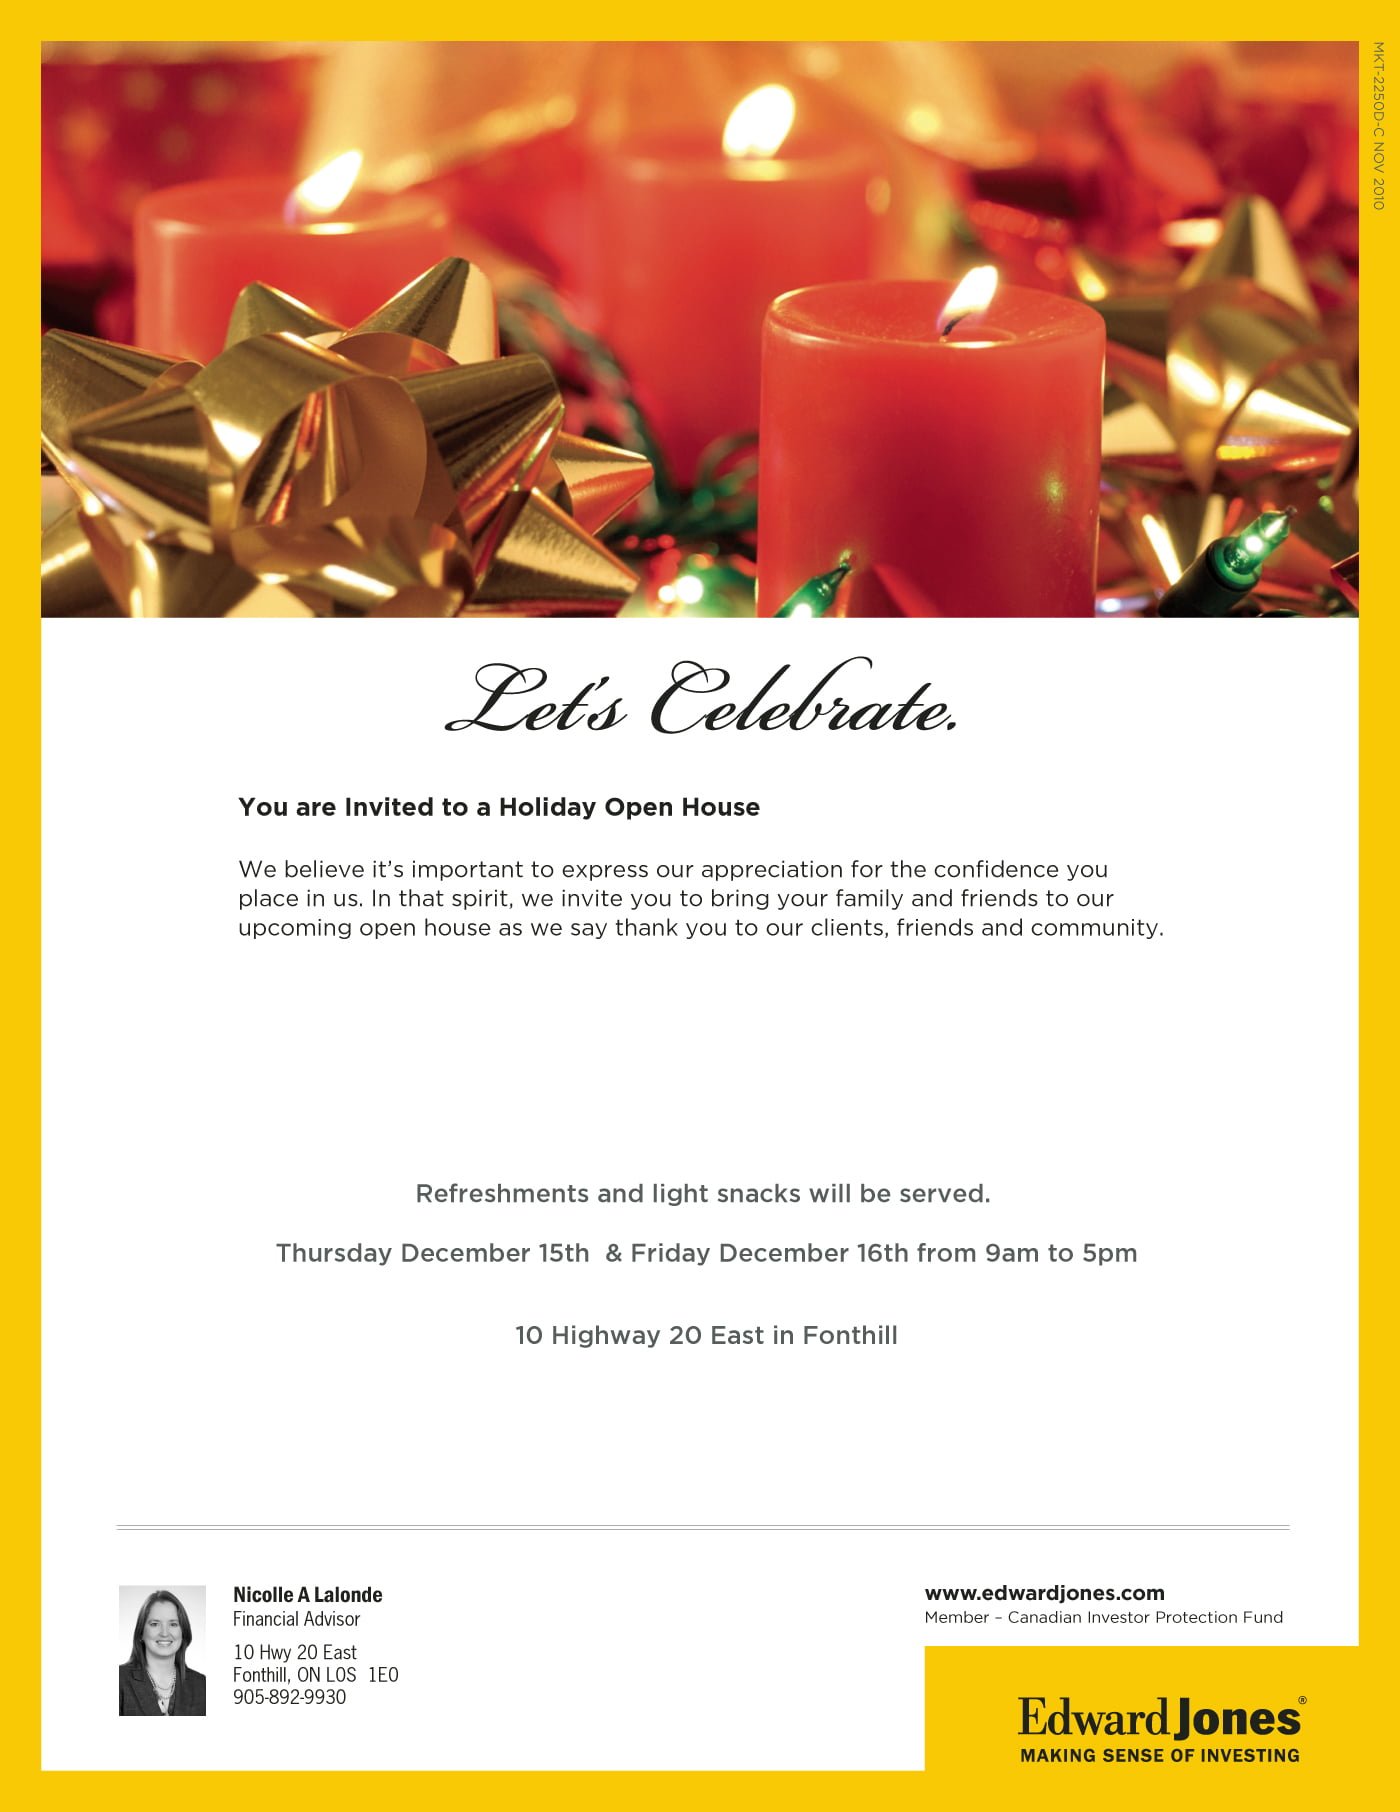 Let’s Celebrate. You are Invited to a Holiday Open House We believe it’s important to express our appreciation for the confidence you place in us. In that spirit, we invite you to bring your family and friends to our upcoming open house as we say thank you to our clients, friends and community. Refreshments and light snacks will be served. Thursday December 15th & Friday December 16th from 9am to 5pm 10 Highway 20 East in Fonthill Nicolle A Lalonde Financial Advisor 10 Hwy 20 East Fonthill, ON L0S 1E0 905-892-9930 www.edwardjones.com Member – Canadian Investor Protection Fund